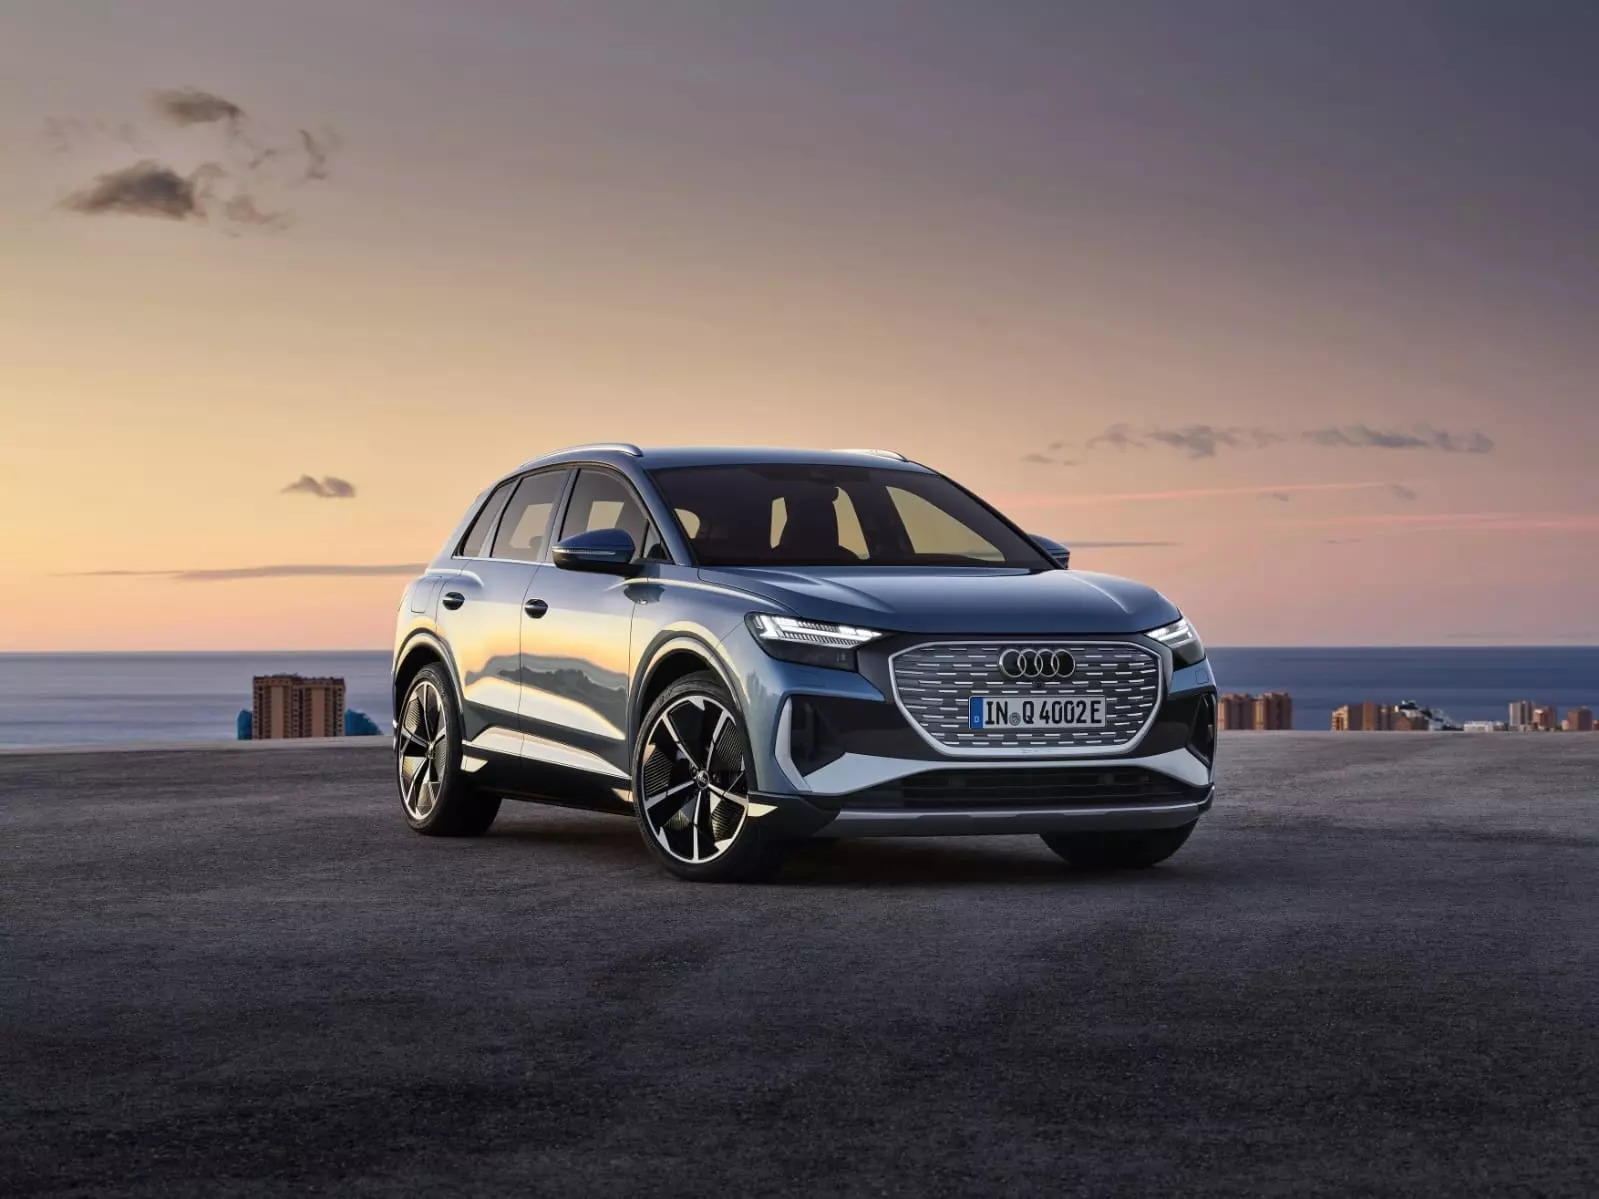 Audi delivers around 1,18,000 electric models by 2022